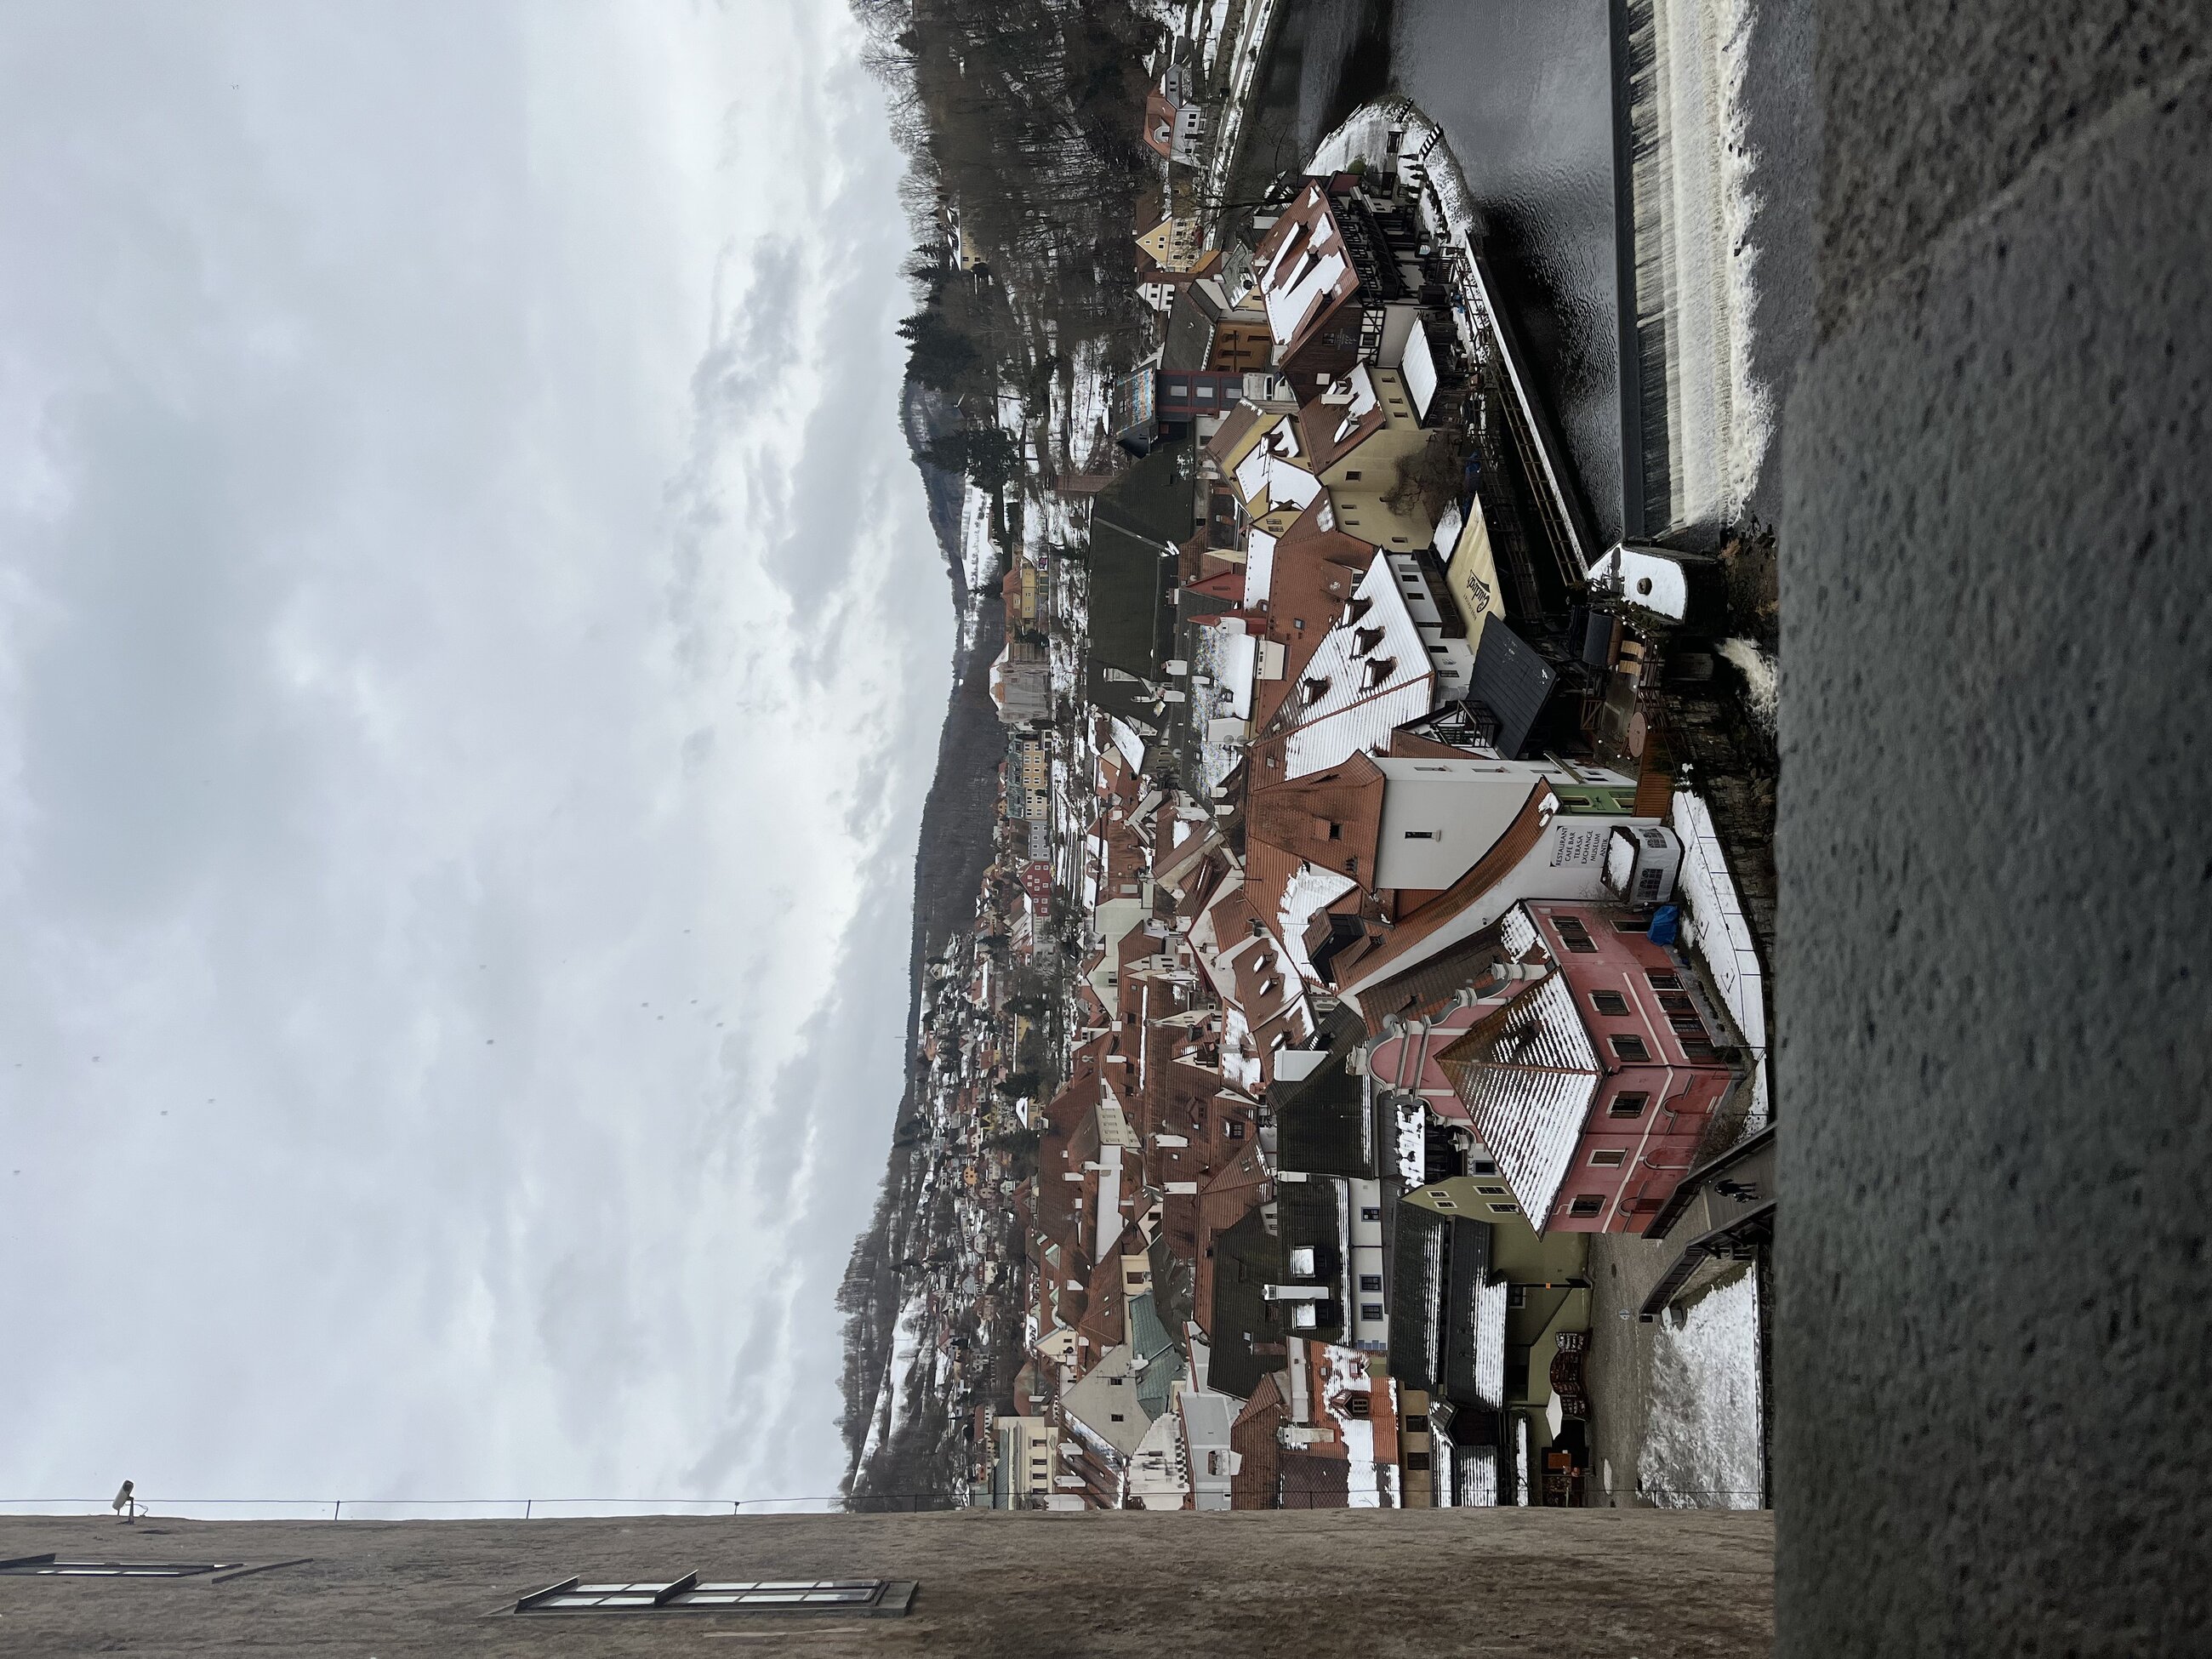 Great view from our overnight trip to Cesky Krumlov